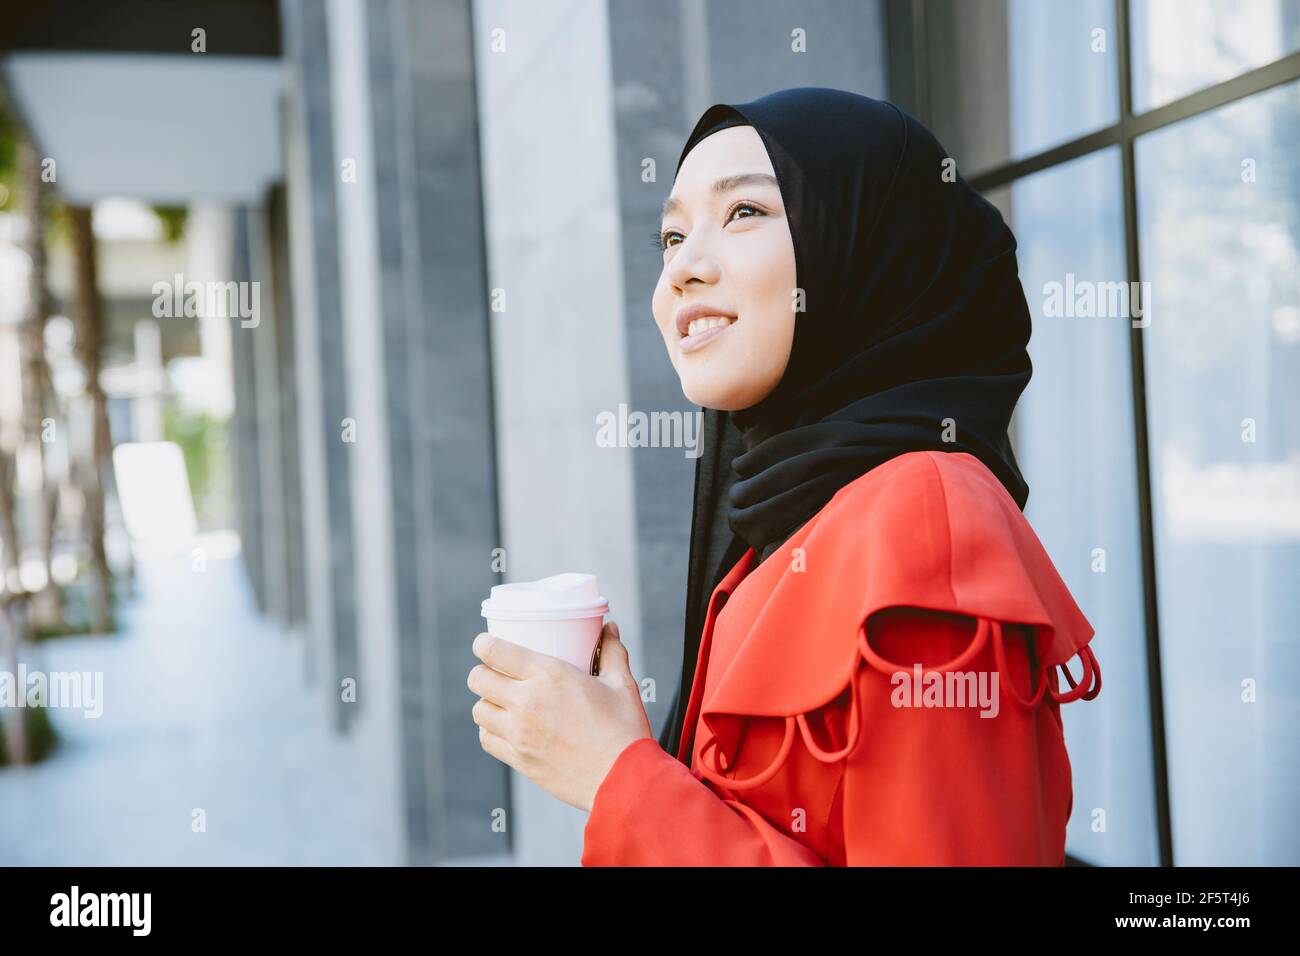 Arab Muslim Asian businesswoman young girl smiling hand hold coffee cup standing portrait Stock Photo